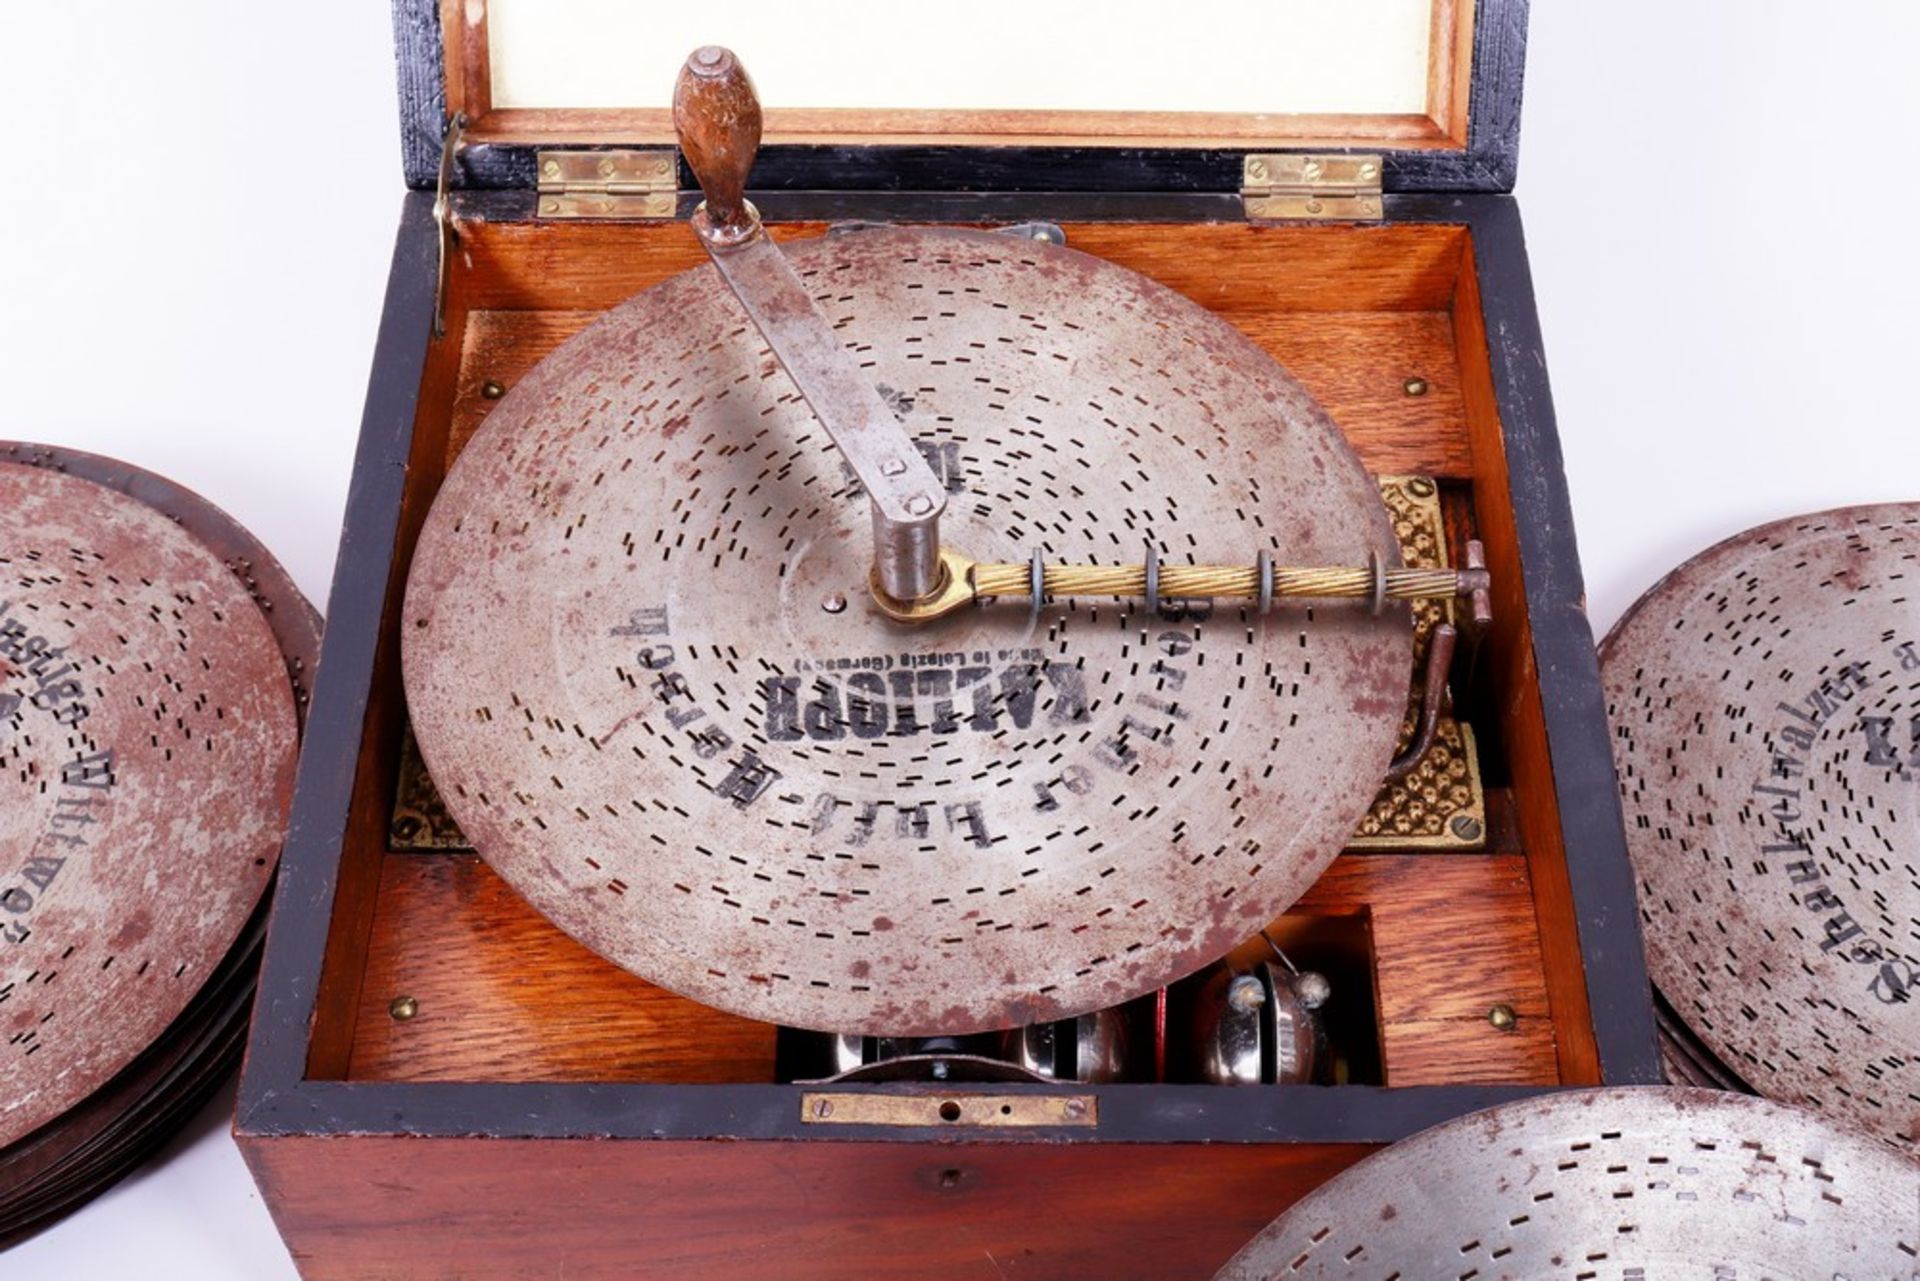 Music box with glockenspiel and perforated plates, Kalliope, Leipzig, c. 1900 - Image 4 of 5